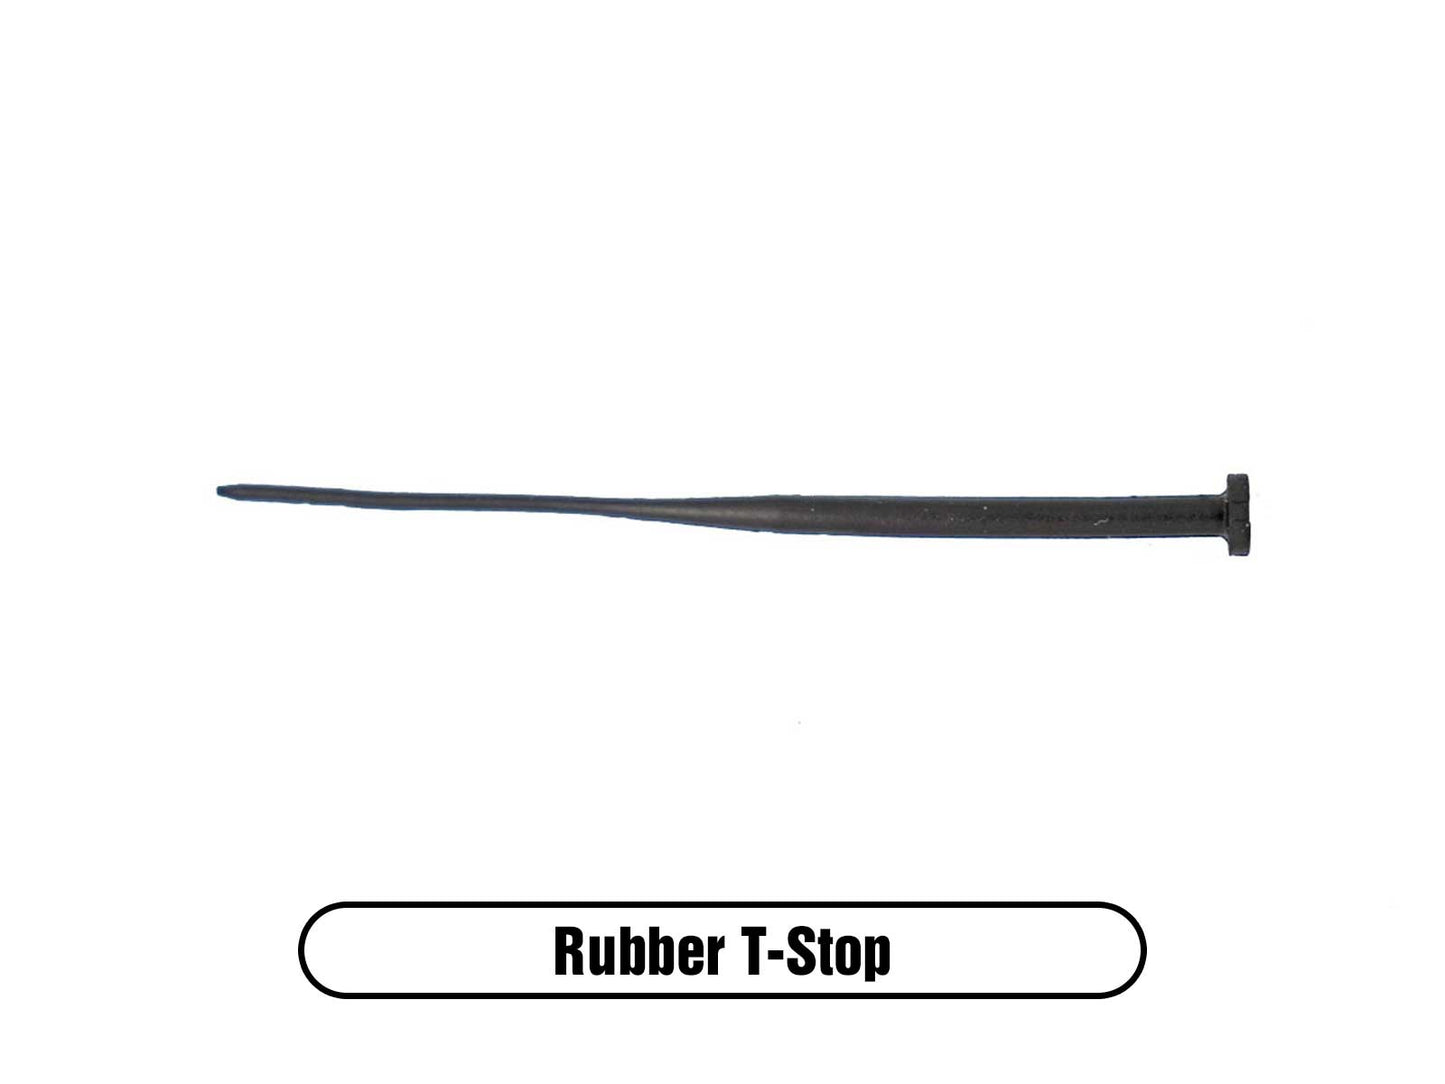 Rubber T-Stop for Largemouth Bass Fishing, Smallmouth Bass Fishing and Walleye Fishing Lure